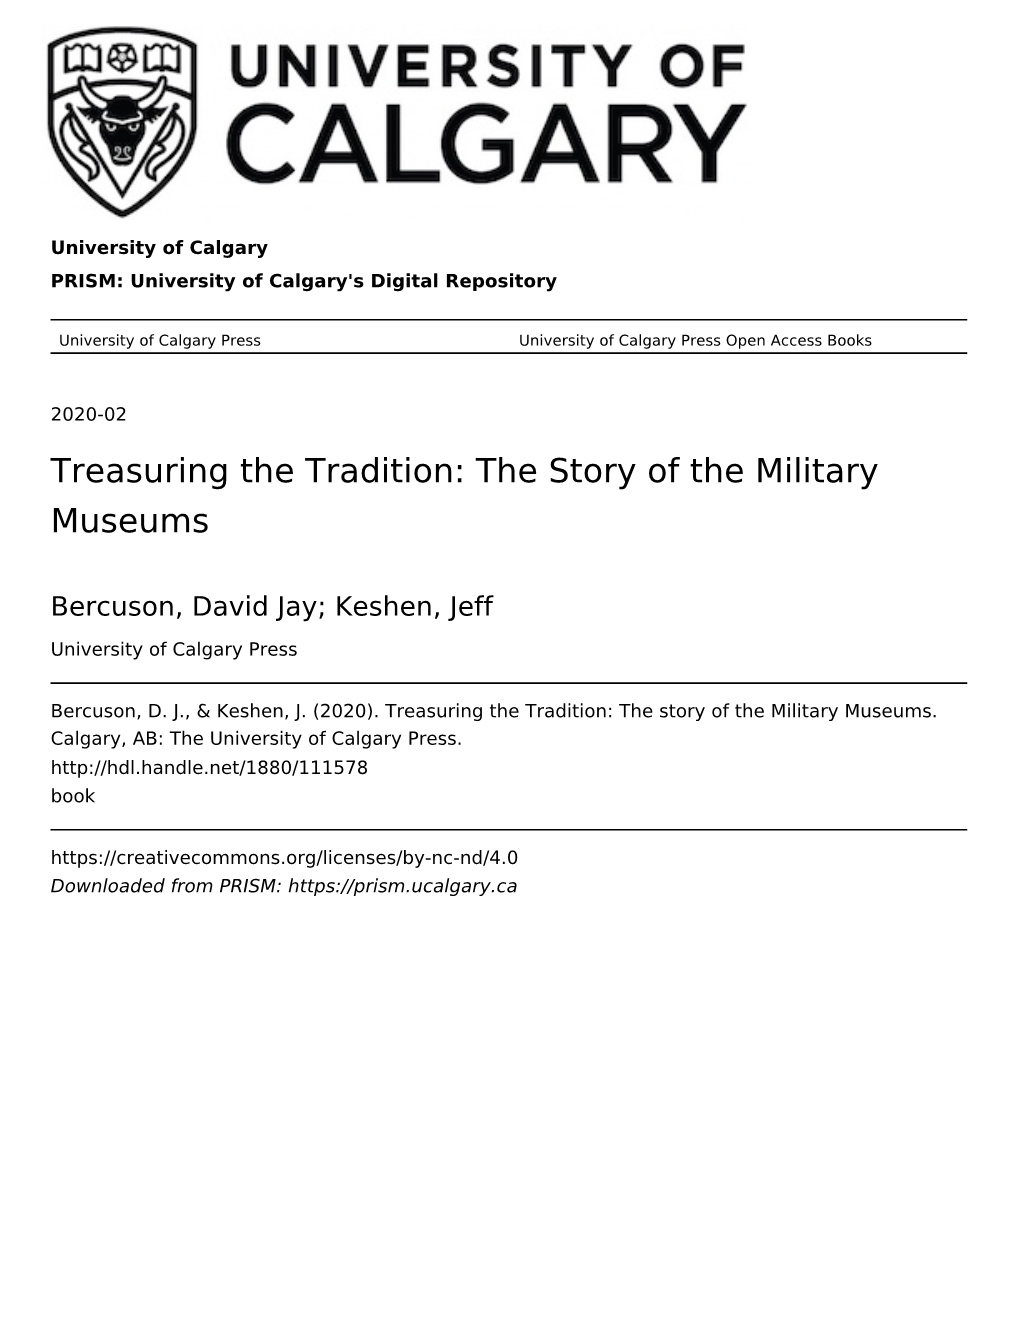 Treasuring the Tradition: the Story of the Military Museums